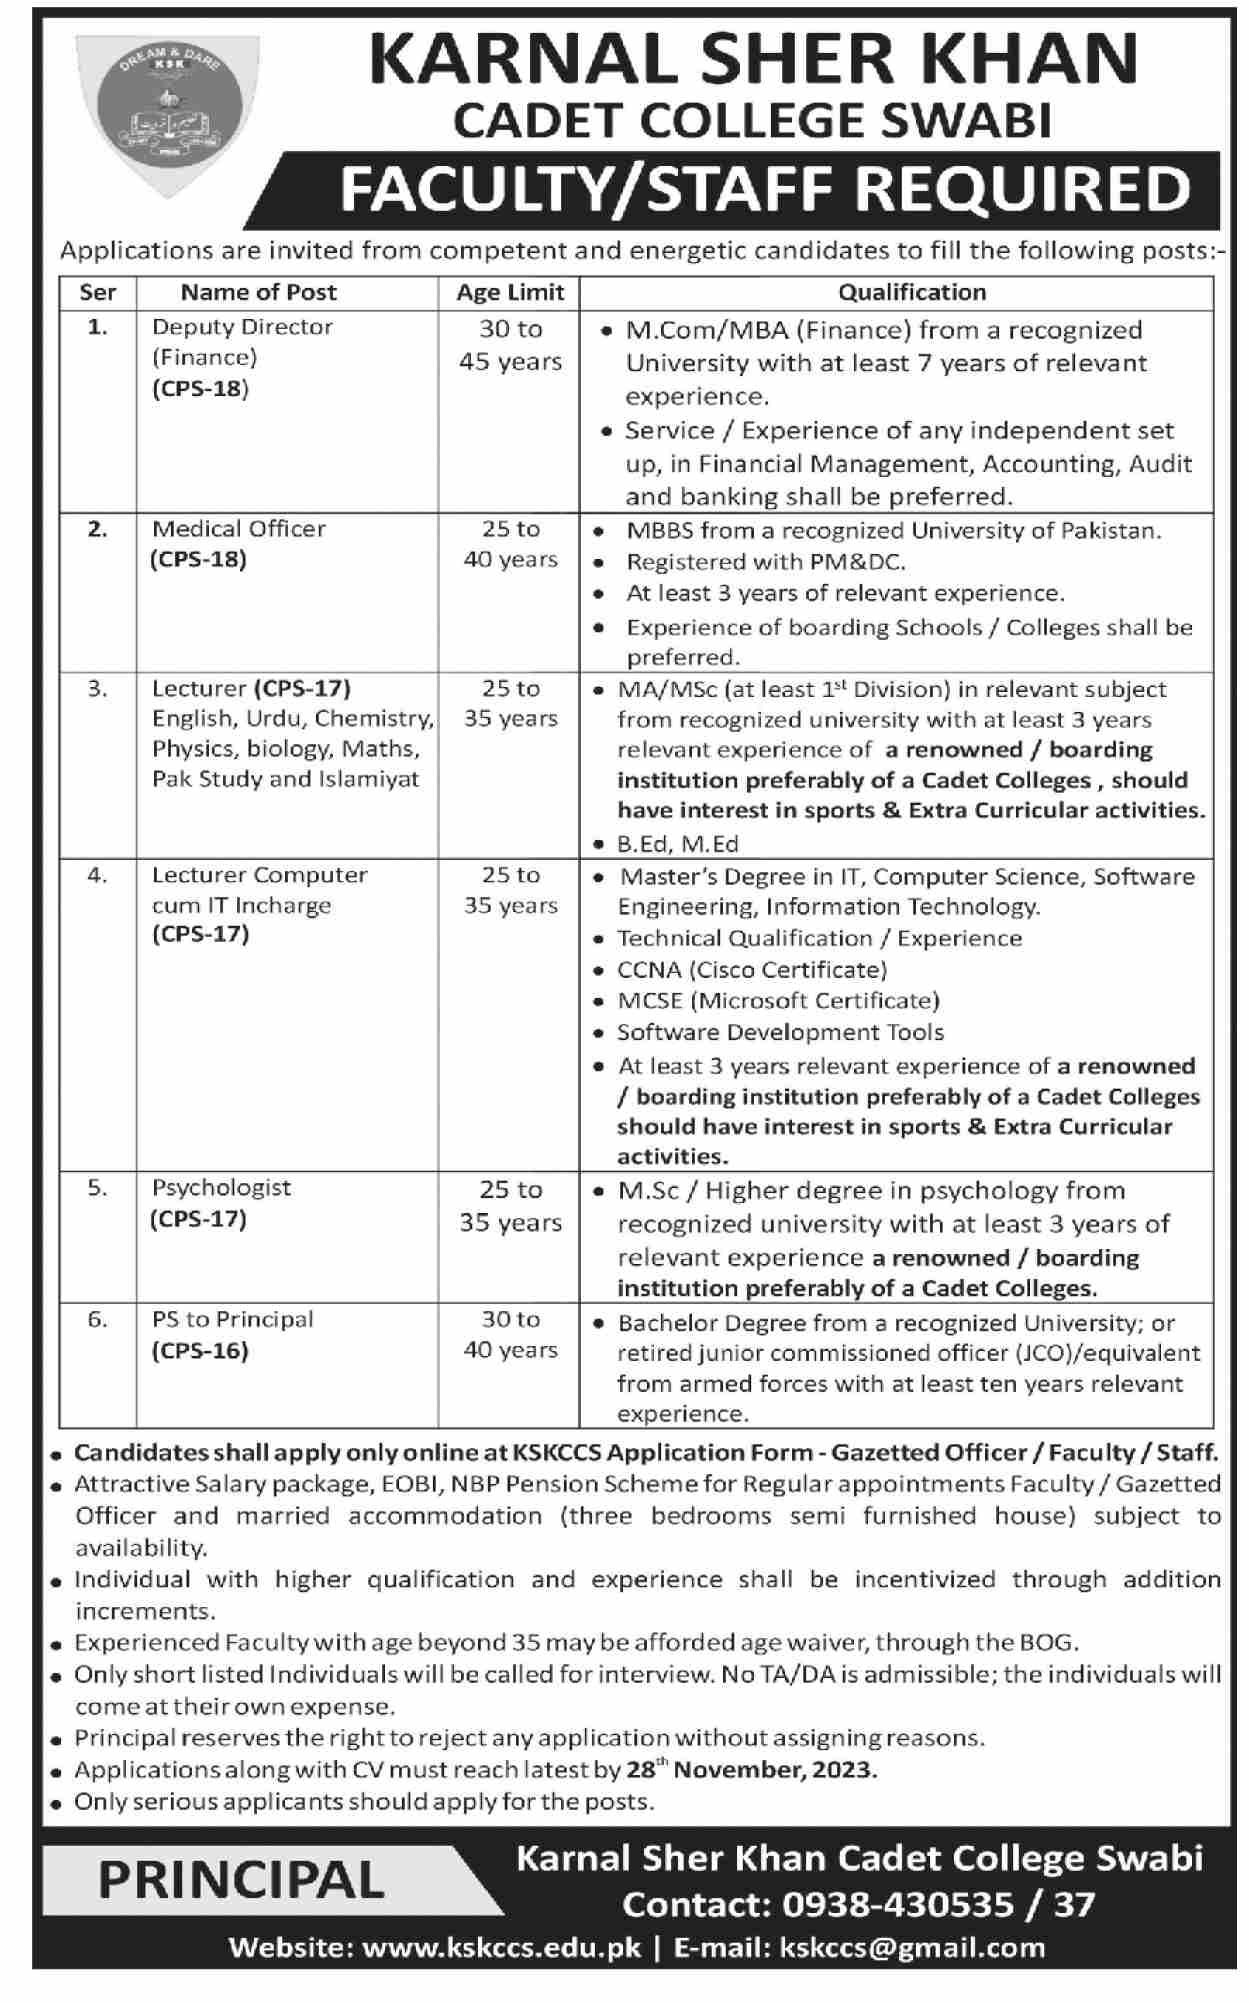 Karnal Sher Khan Cadet College Swabi Faculty Staff Required